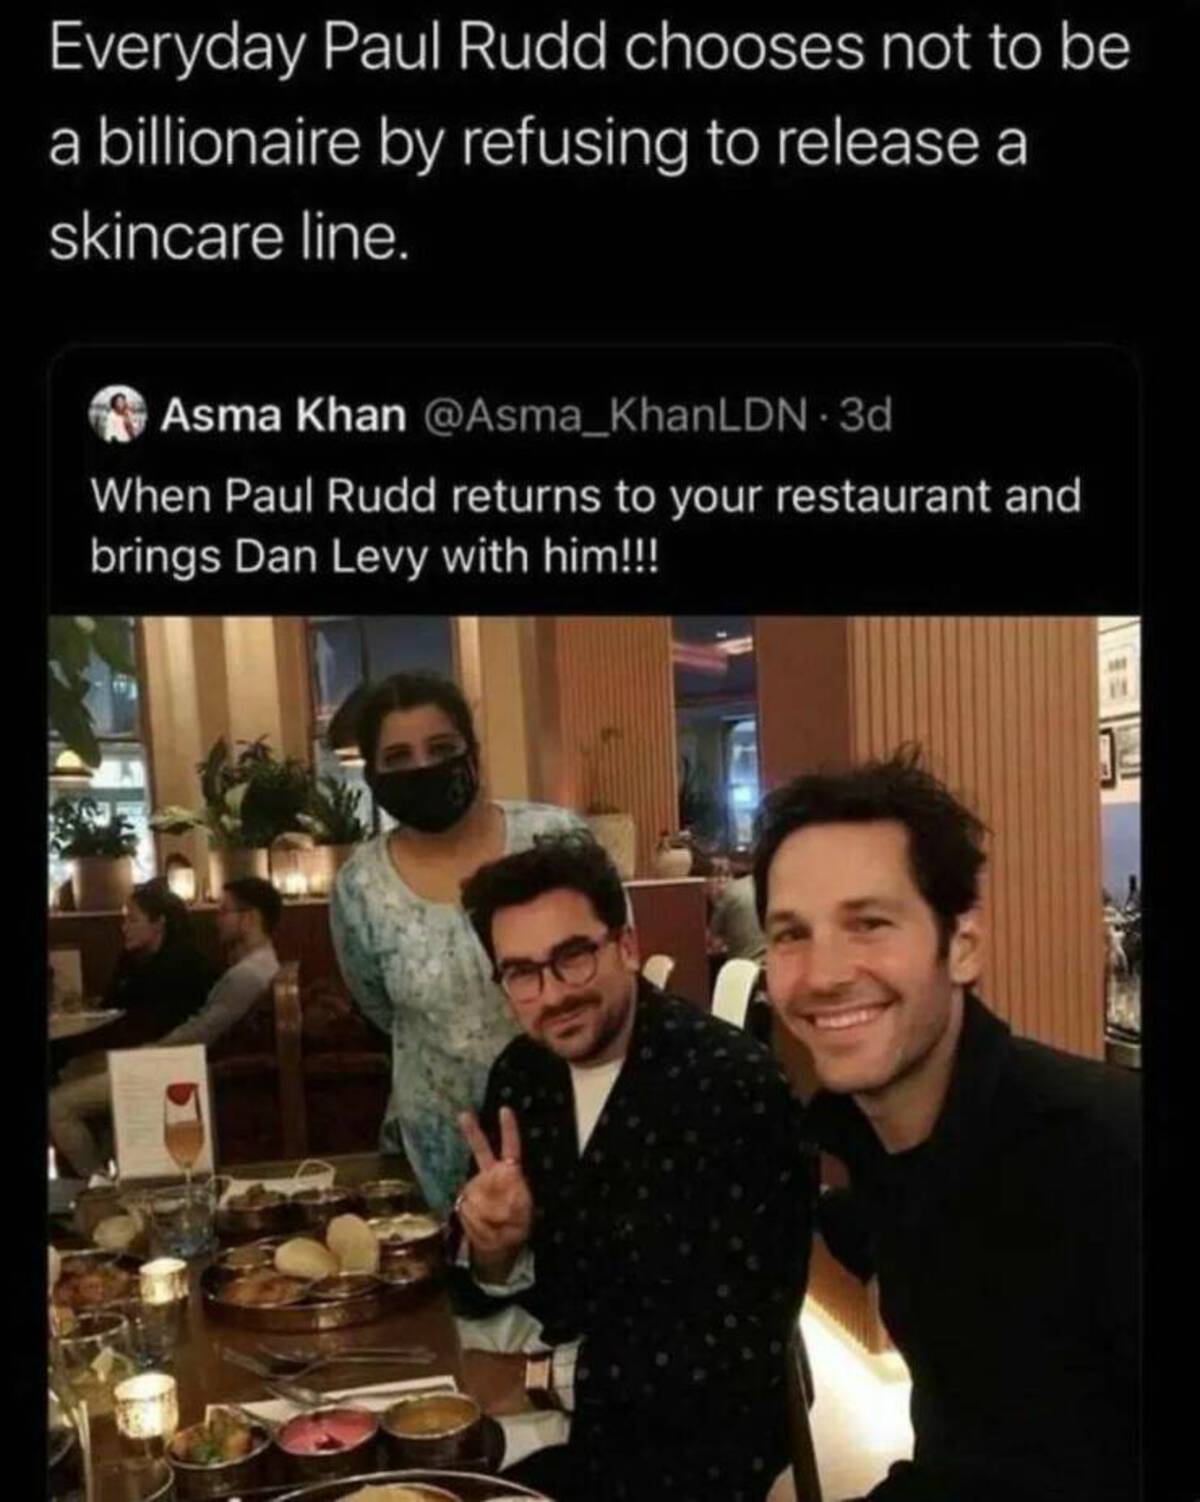 asma khan restaurant - Everyday Paul Rudd chooses not to be a billionaire by refusing to release a skincare line. Asma Khan 3d When Paul Rudd returns to your restaurant and brings Dan Levy with him!!!